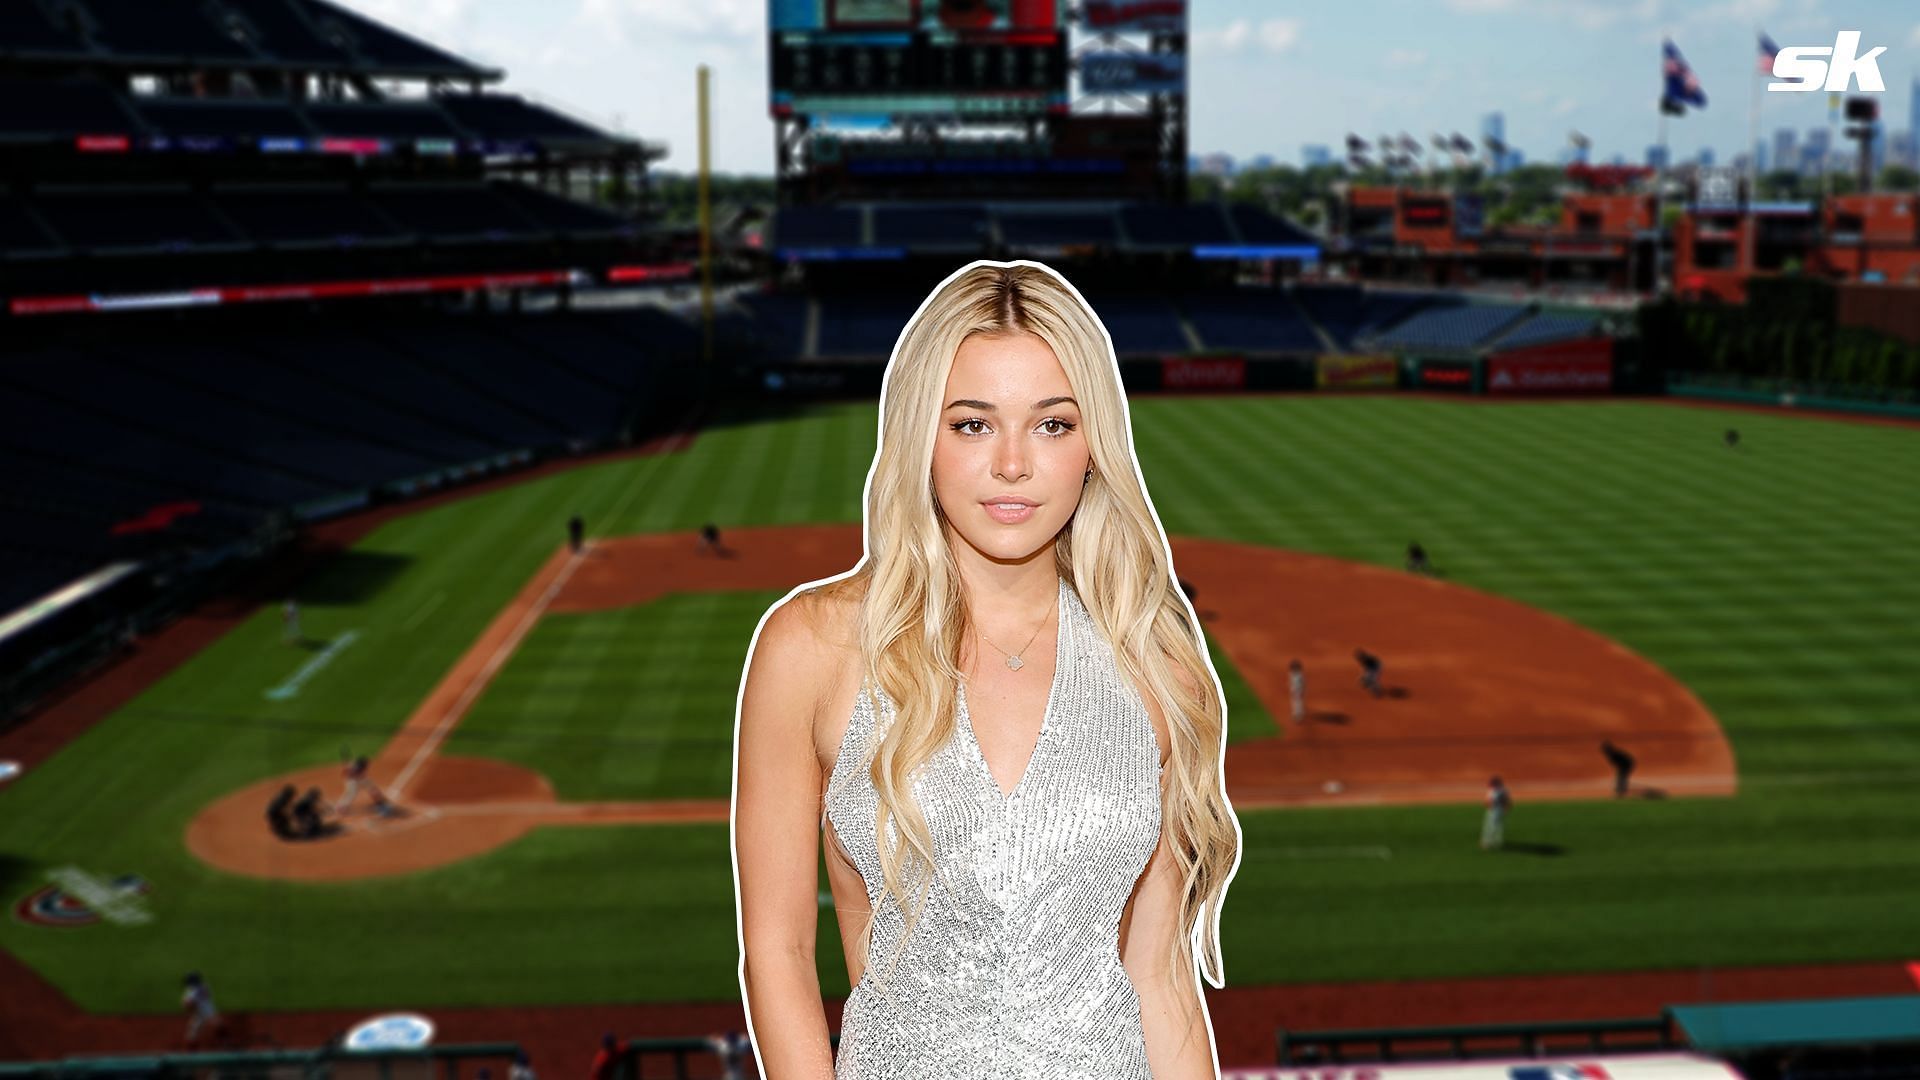 Gymnast Olivia Dunne shed light on her favorite snack to eat at a baseball game